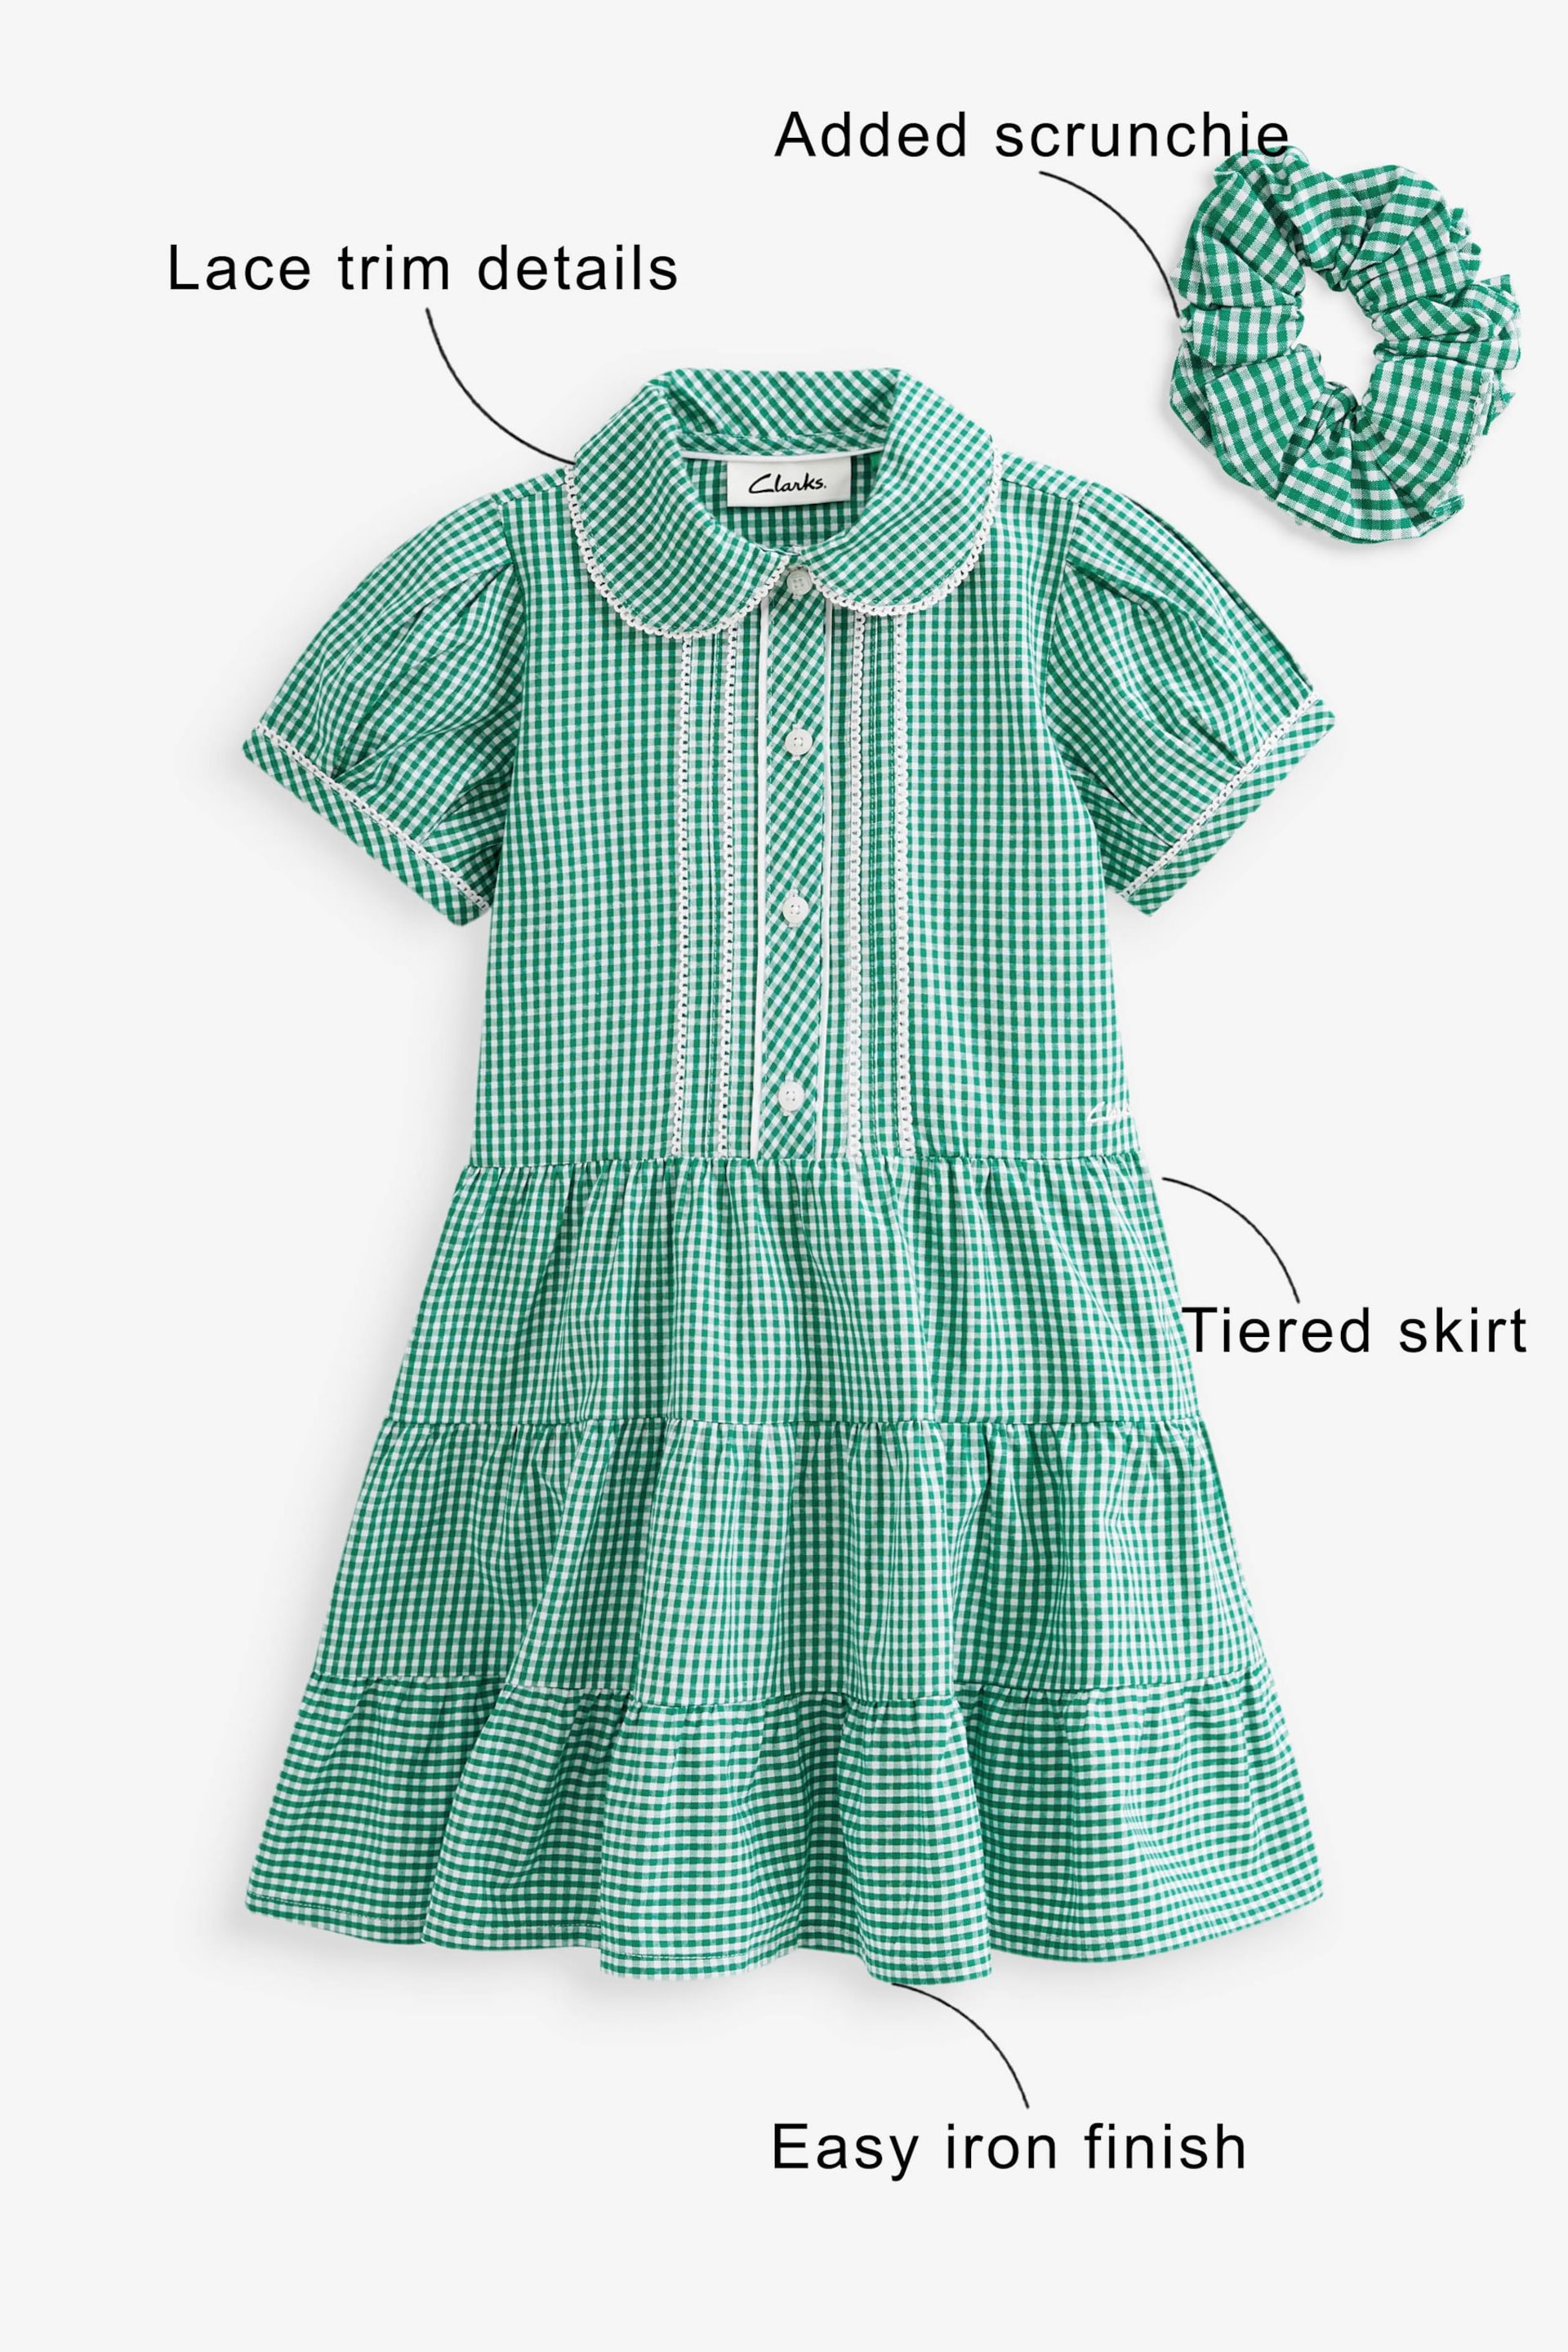 Clarks Green Clarks Gingham School Dress and Scrunchie Set - Image 10 of 10